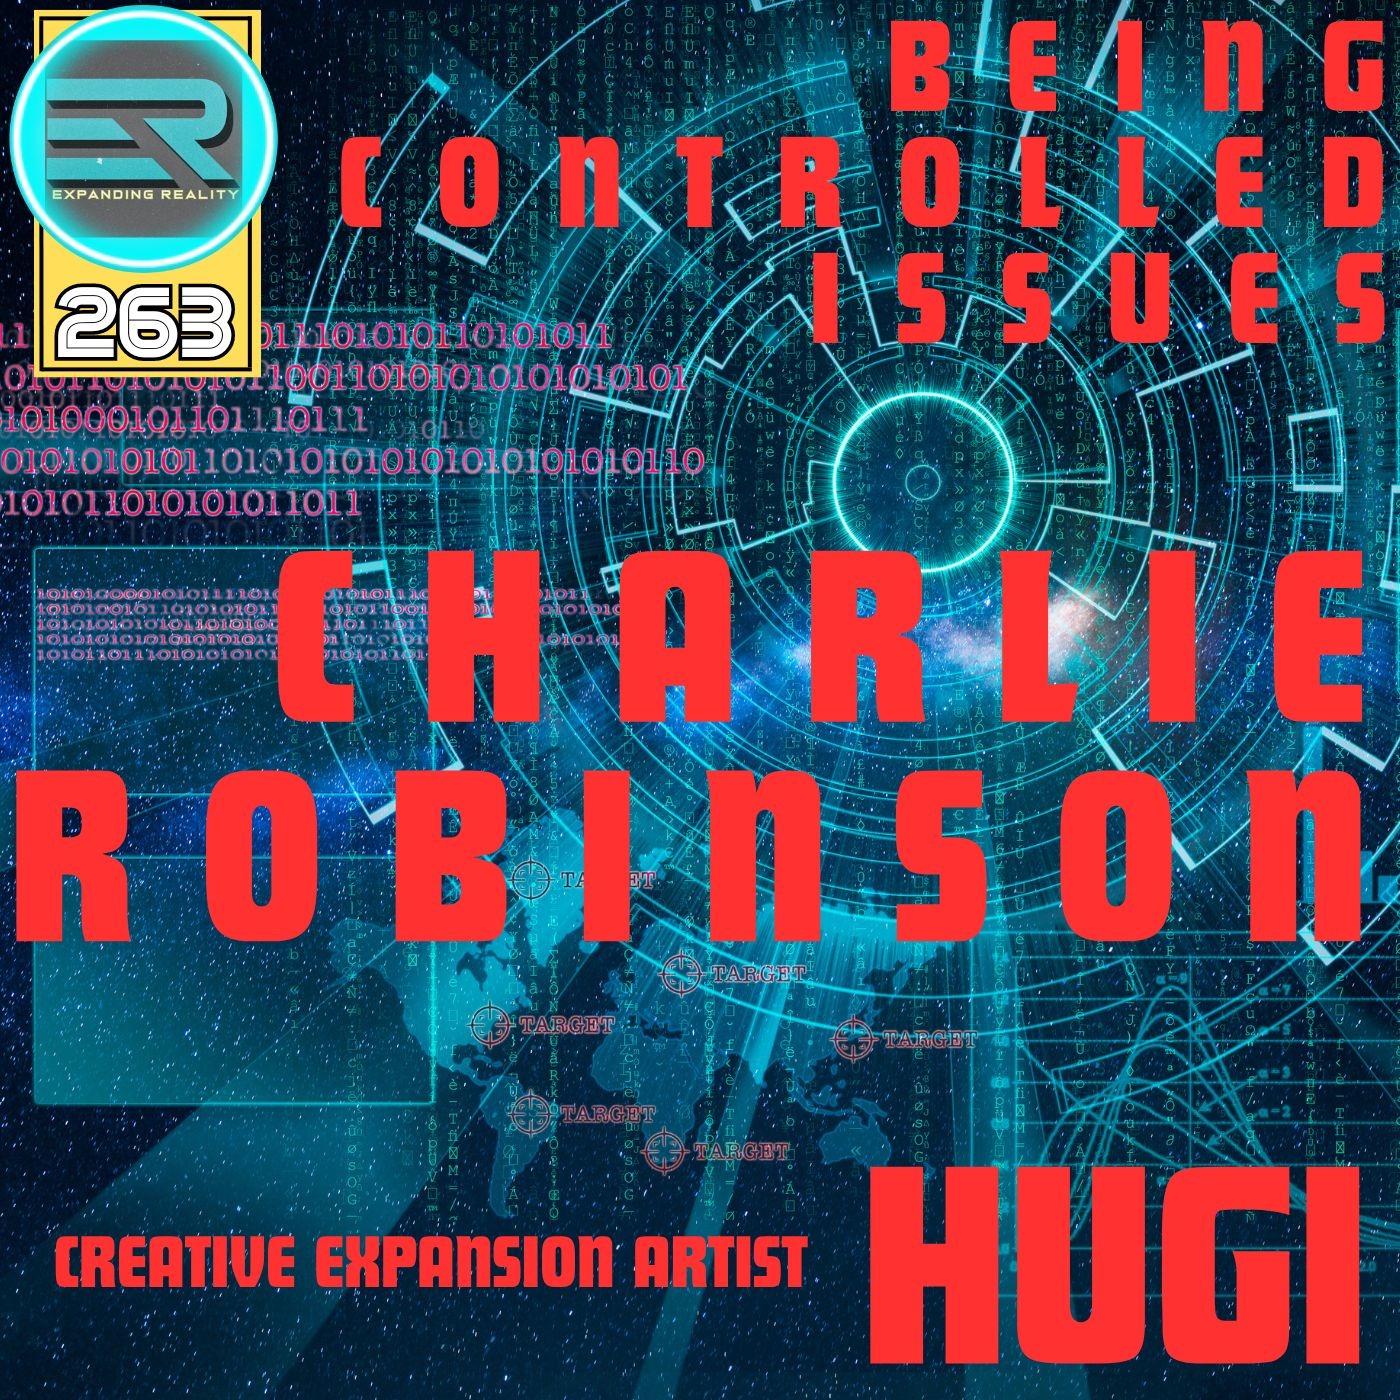 263 | Charlie Robinson | Being Controlled Issues | with Creative Expansion Artist - Hugi